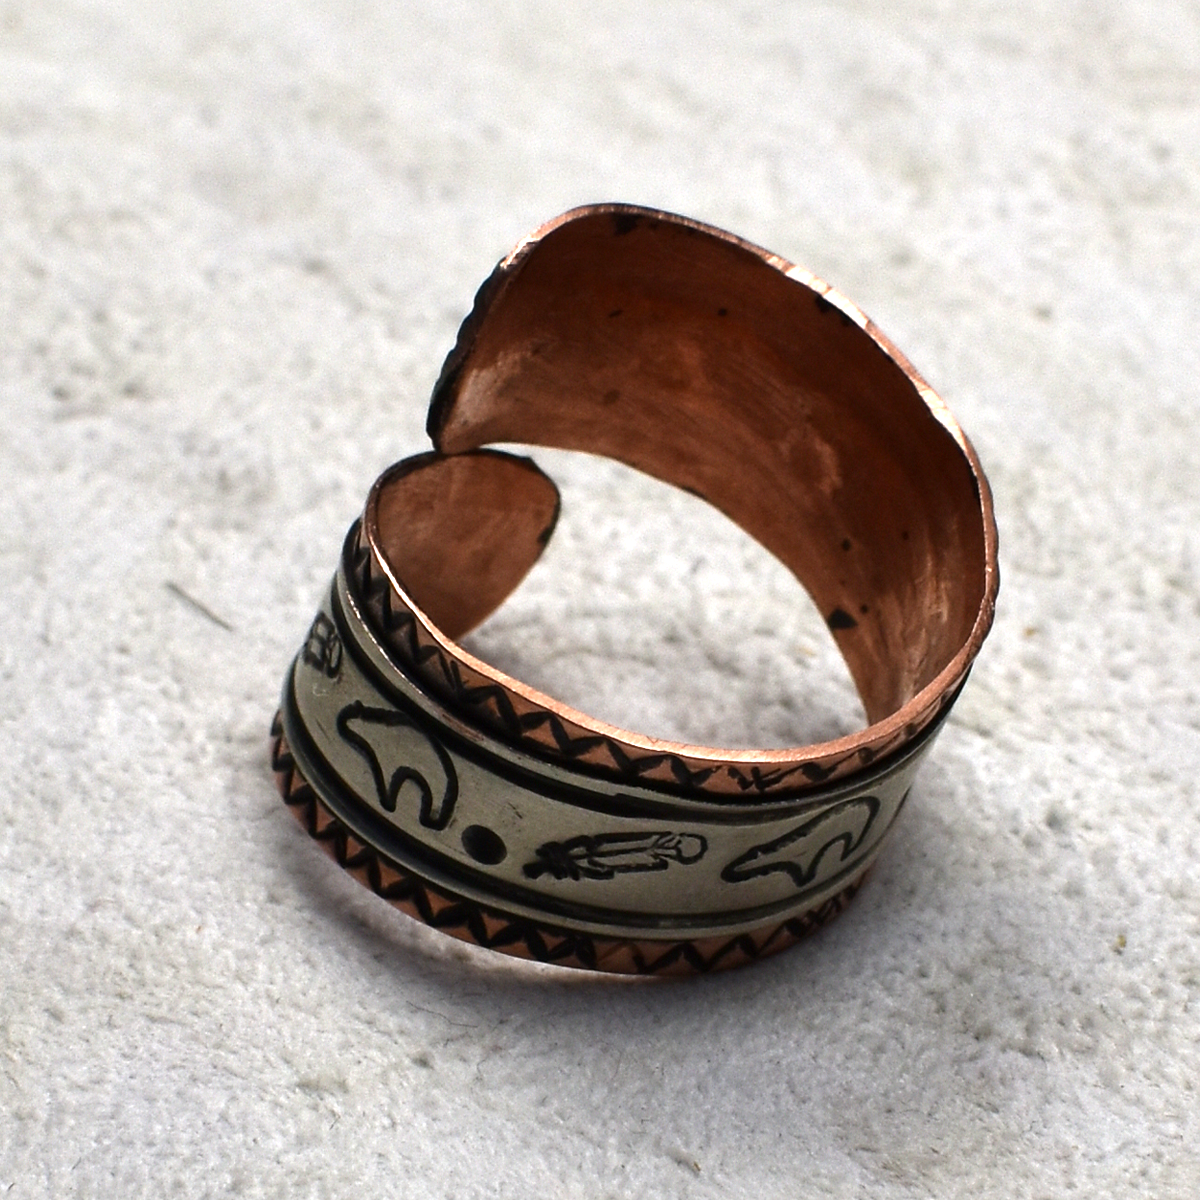 Copper and Nickel Wraparound Ring with Bear & Feather Stamping by A. Begay